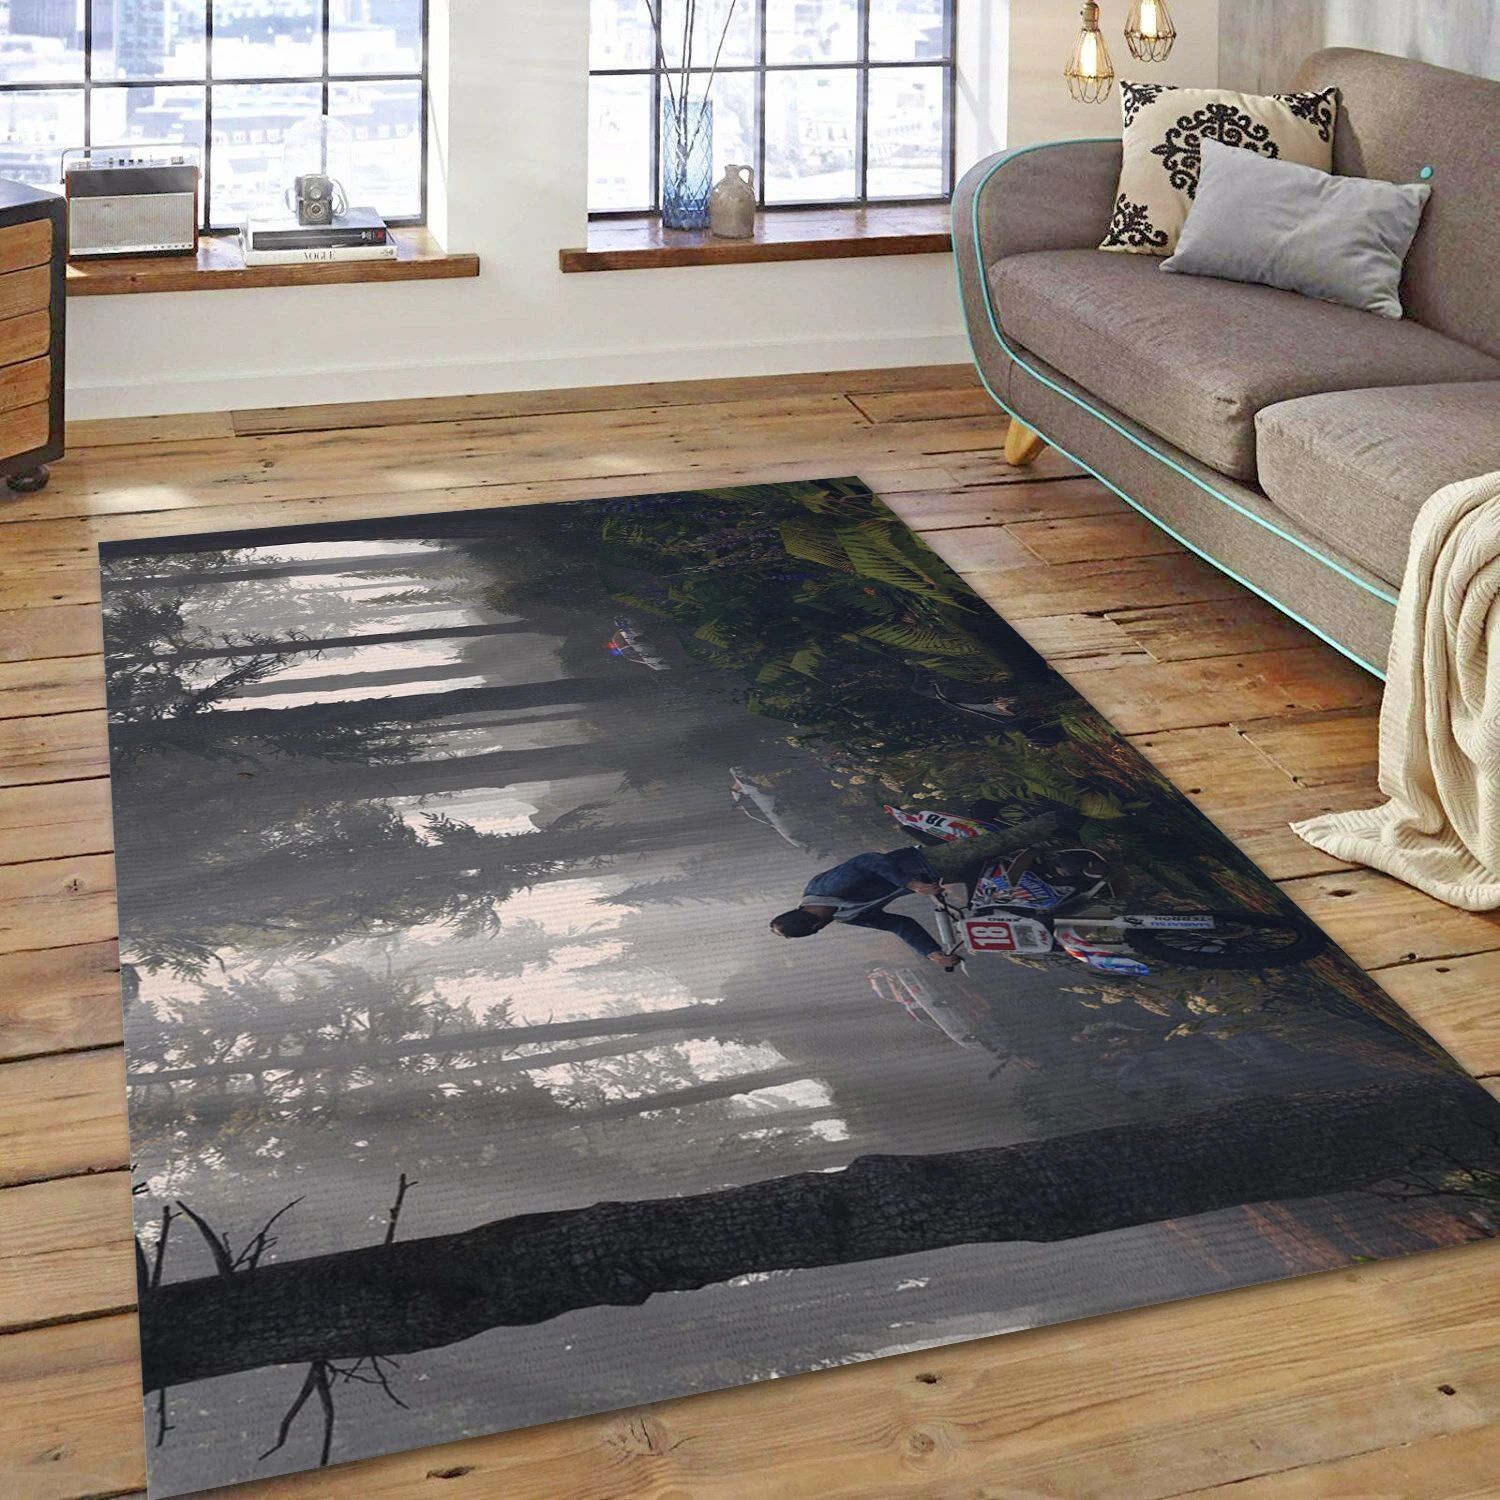 Grand Theft Auto V Gaming Area Rug, Area Rug - Home Decor Floor Decor - Indoor Outdoor Rugs